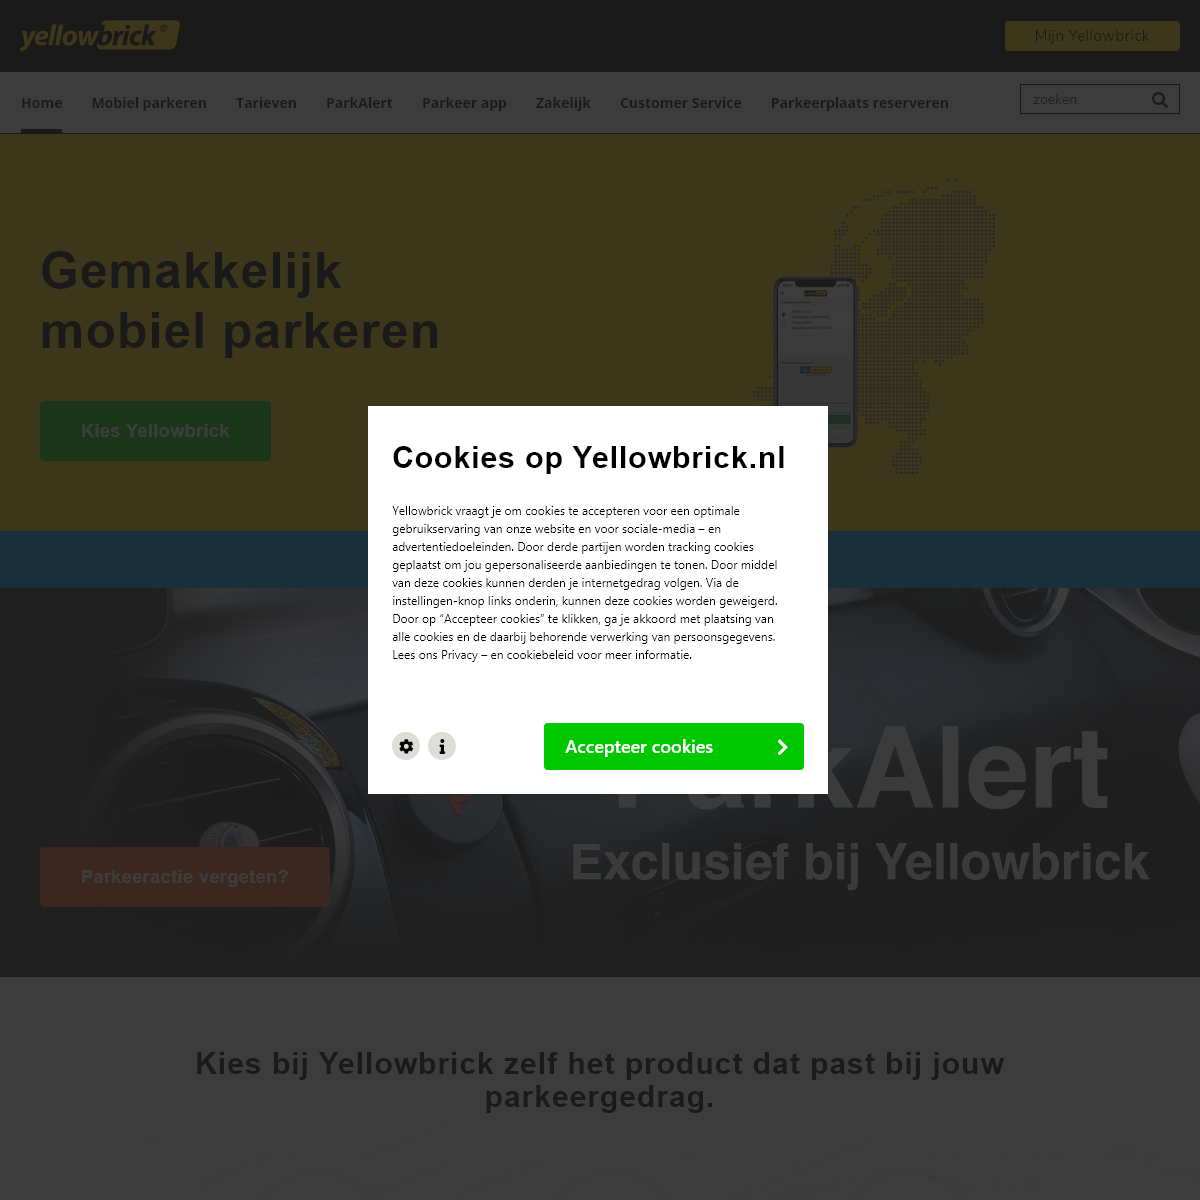 A complete backup of yellowbrick.nl